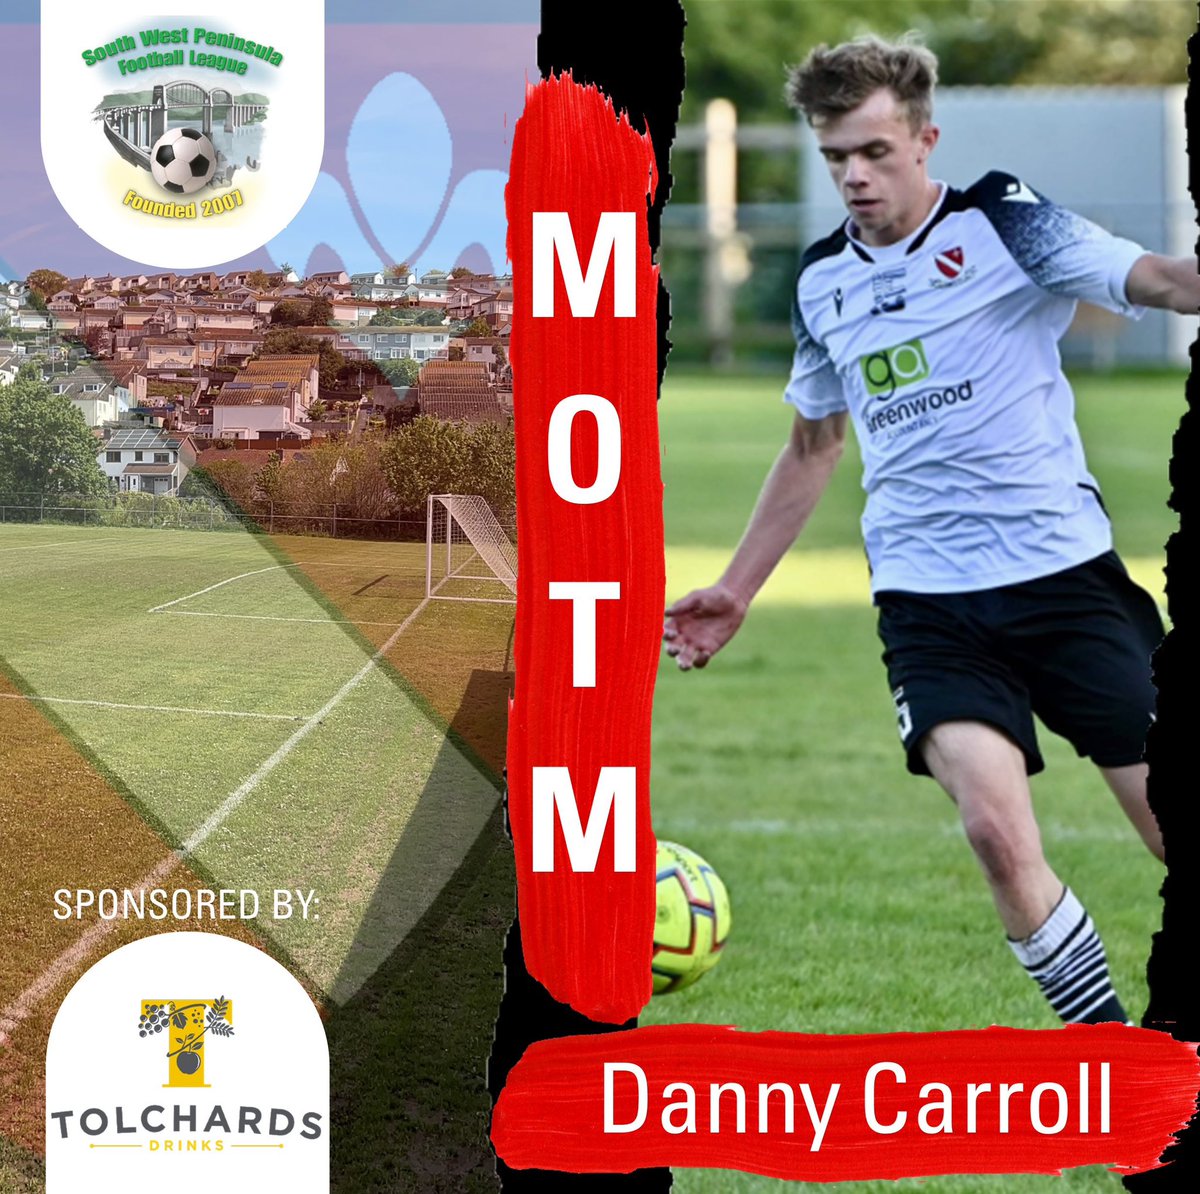 A player who’s recently enjoyed three straight starts, helping himself to a goal in that run. He earned this award for his boundless energy and being a constant threat out wide, and in behind the Honiton defence. The MotM, sponsored by @tolchards, goes to Danny Carroll 💪🏼